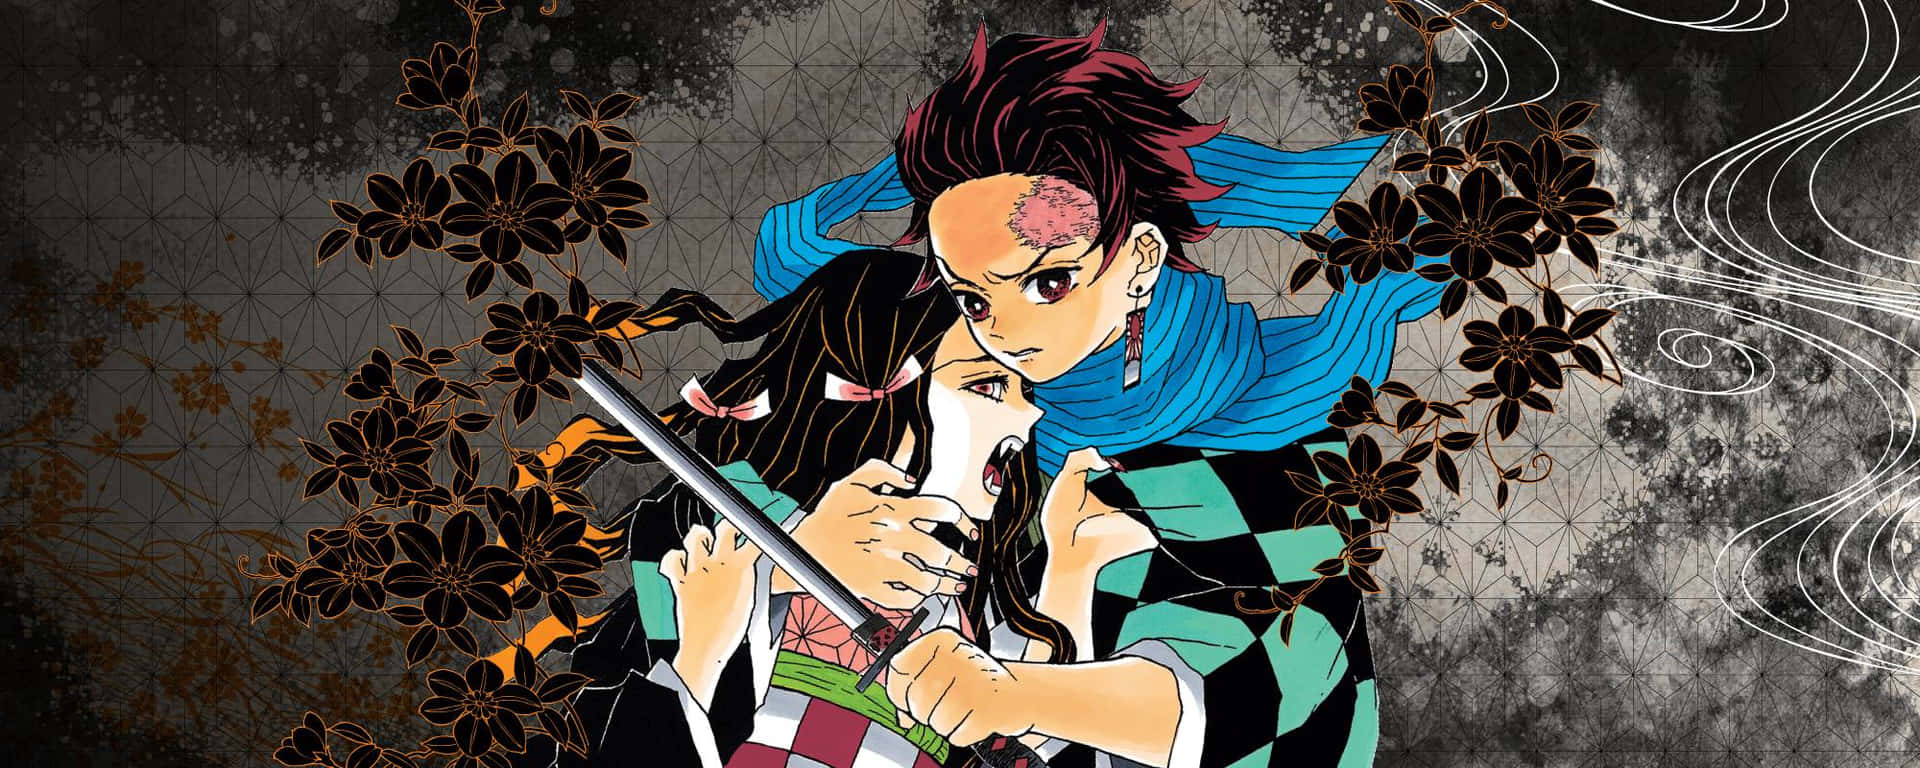 Join Tanjiro And His Friends On Their Quest To Save Nezuko In Demon Slayer Manga Background